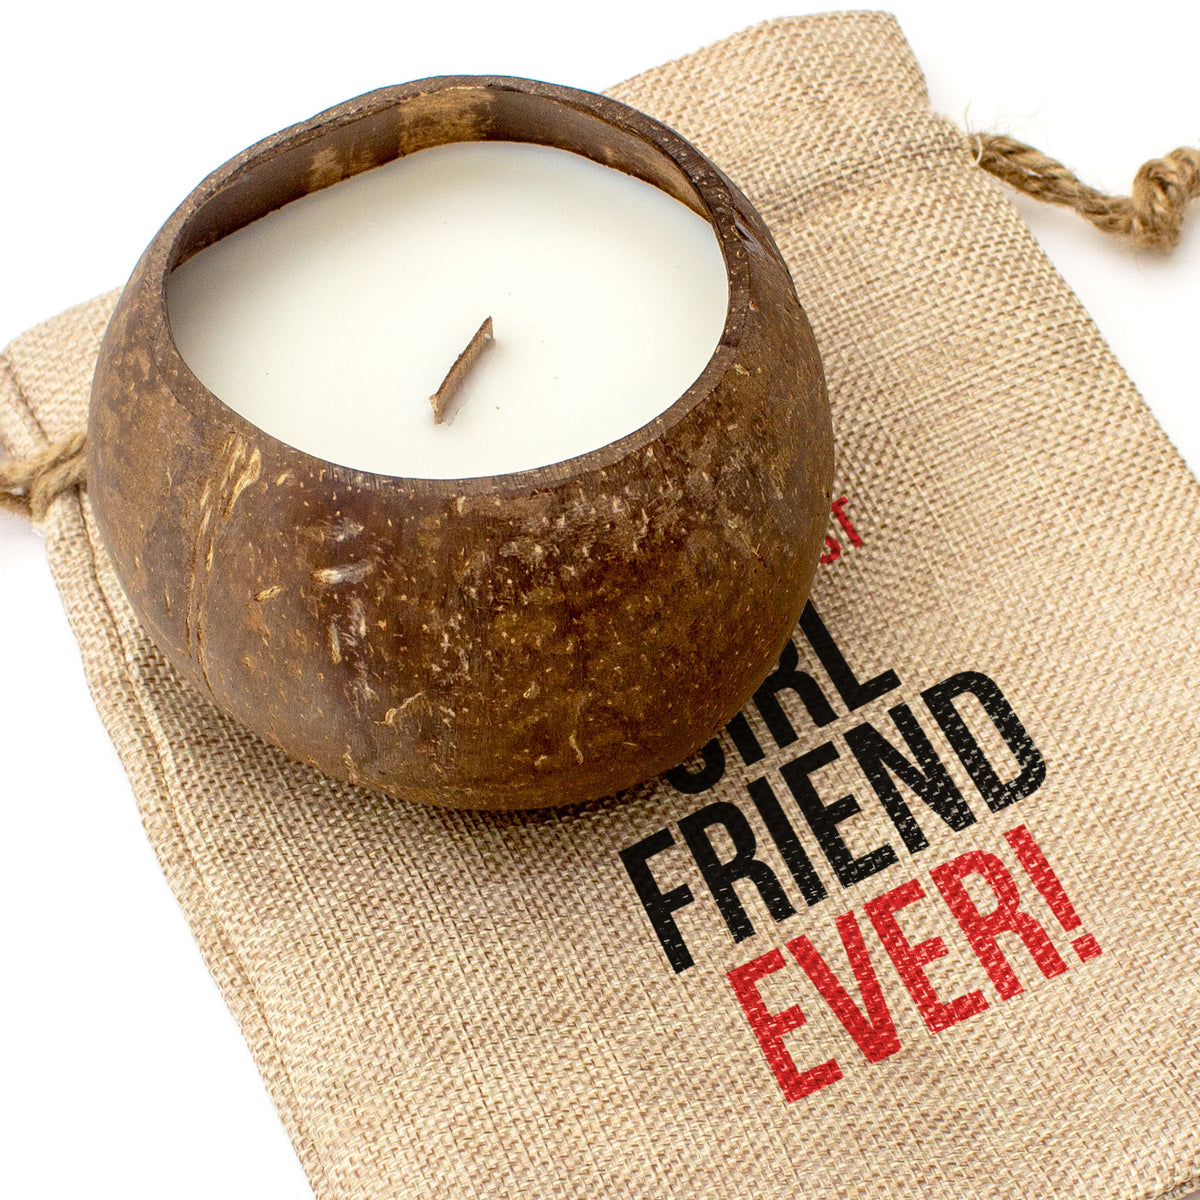 GREATEST GIRLFRIEND EVER - Toasted Coconut Bowl Candle – Soy Wax - Gift Present